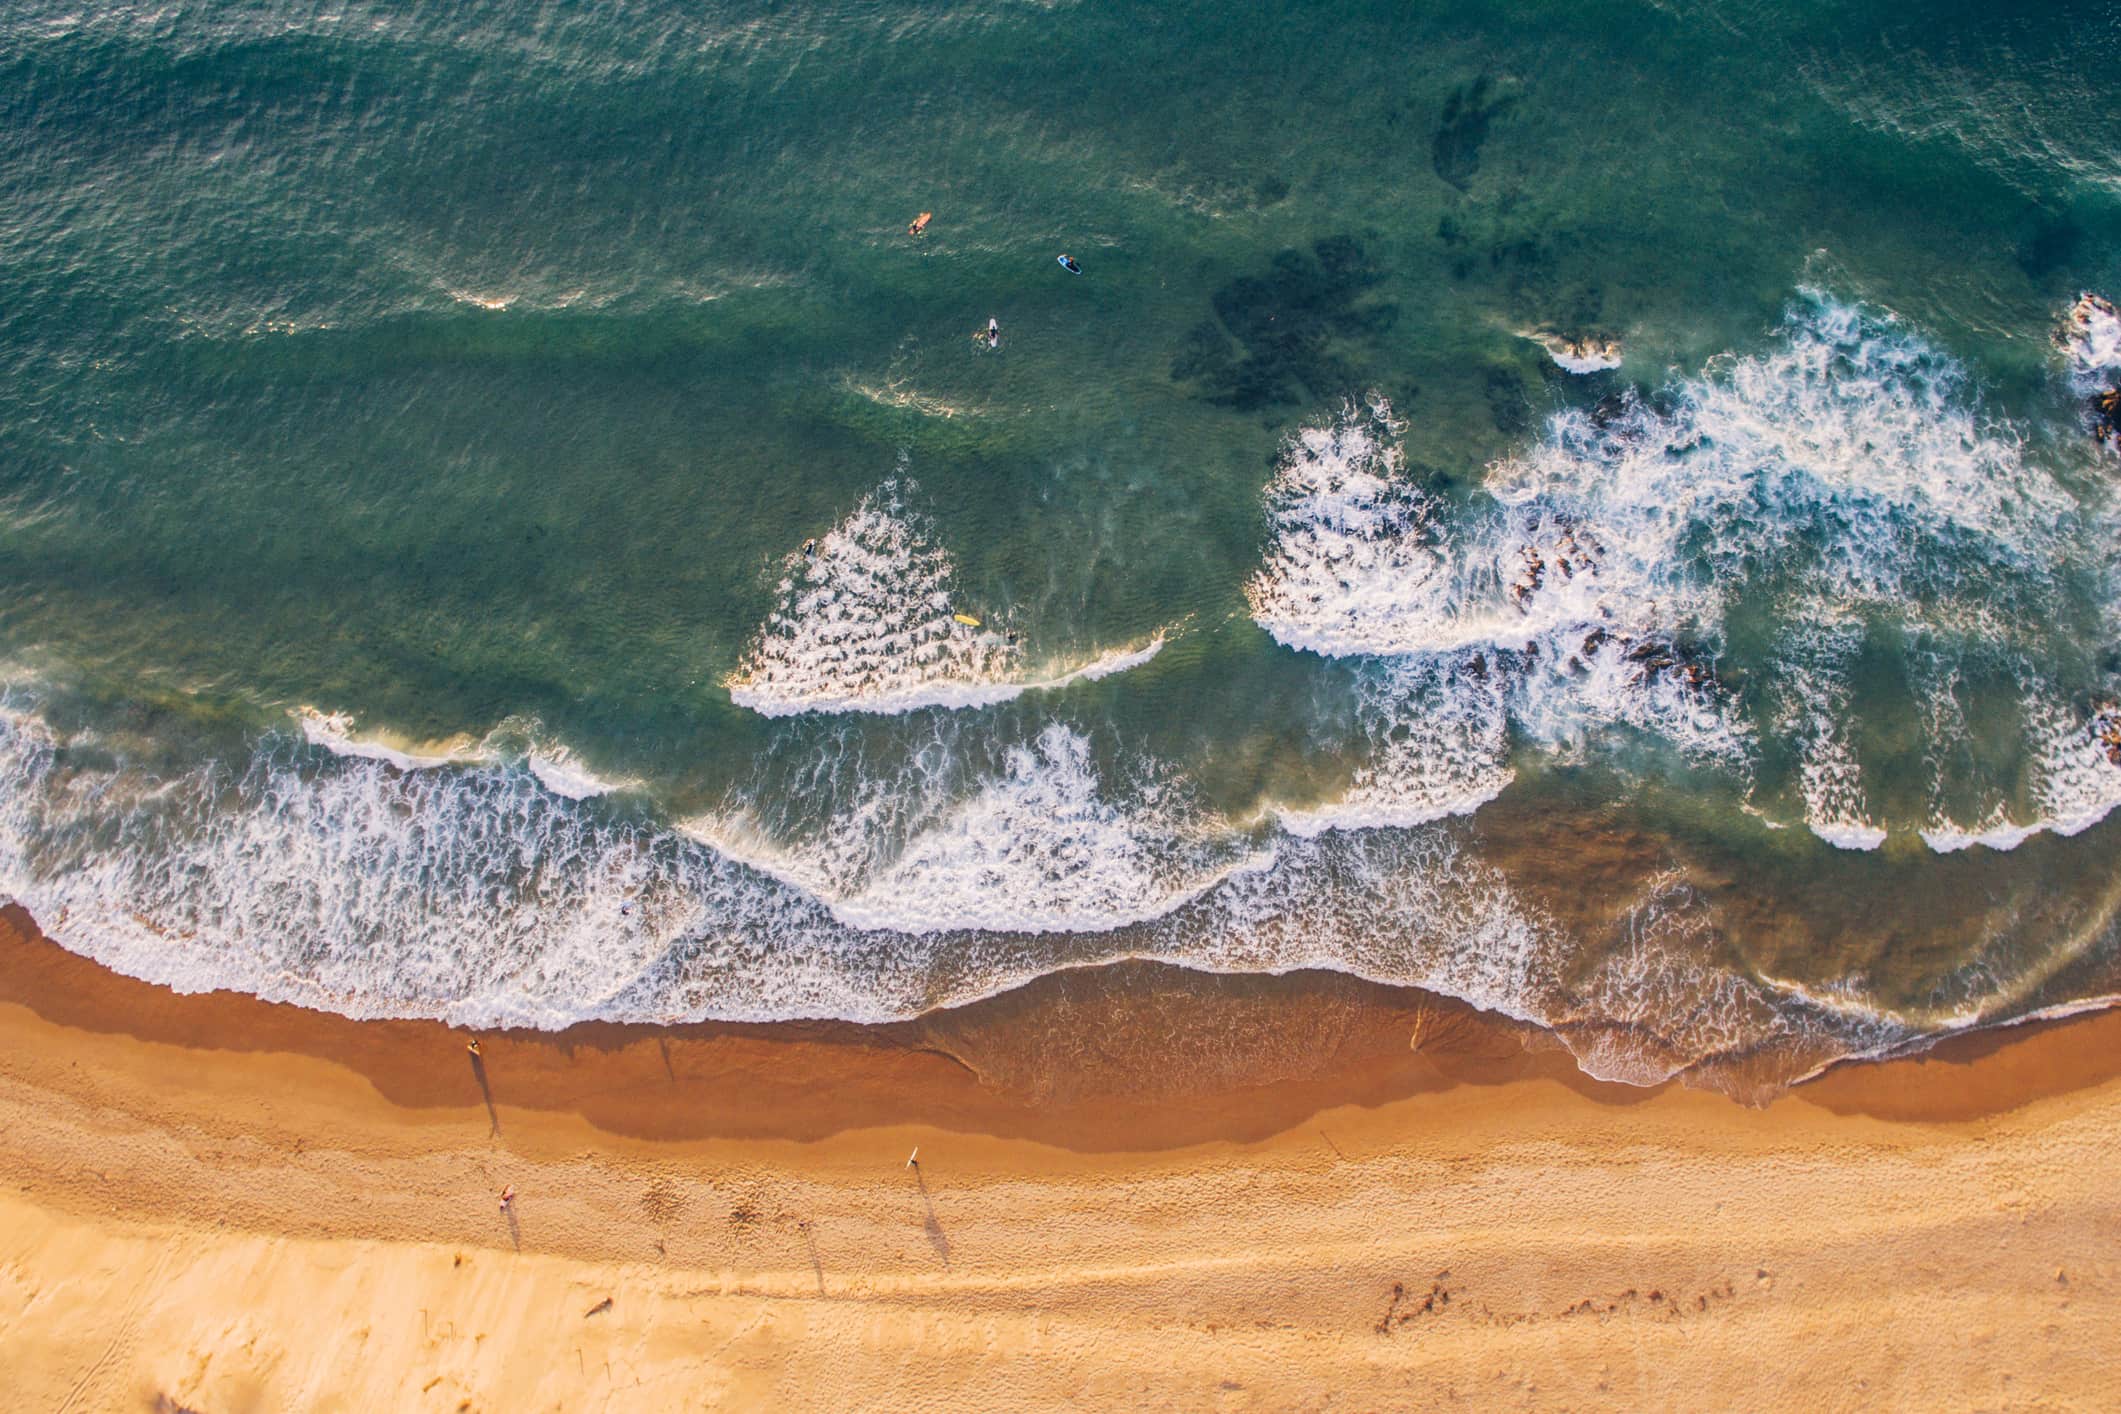 Getting Started in Drone Photography: Selecting the Right Drone